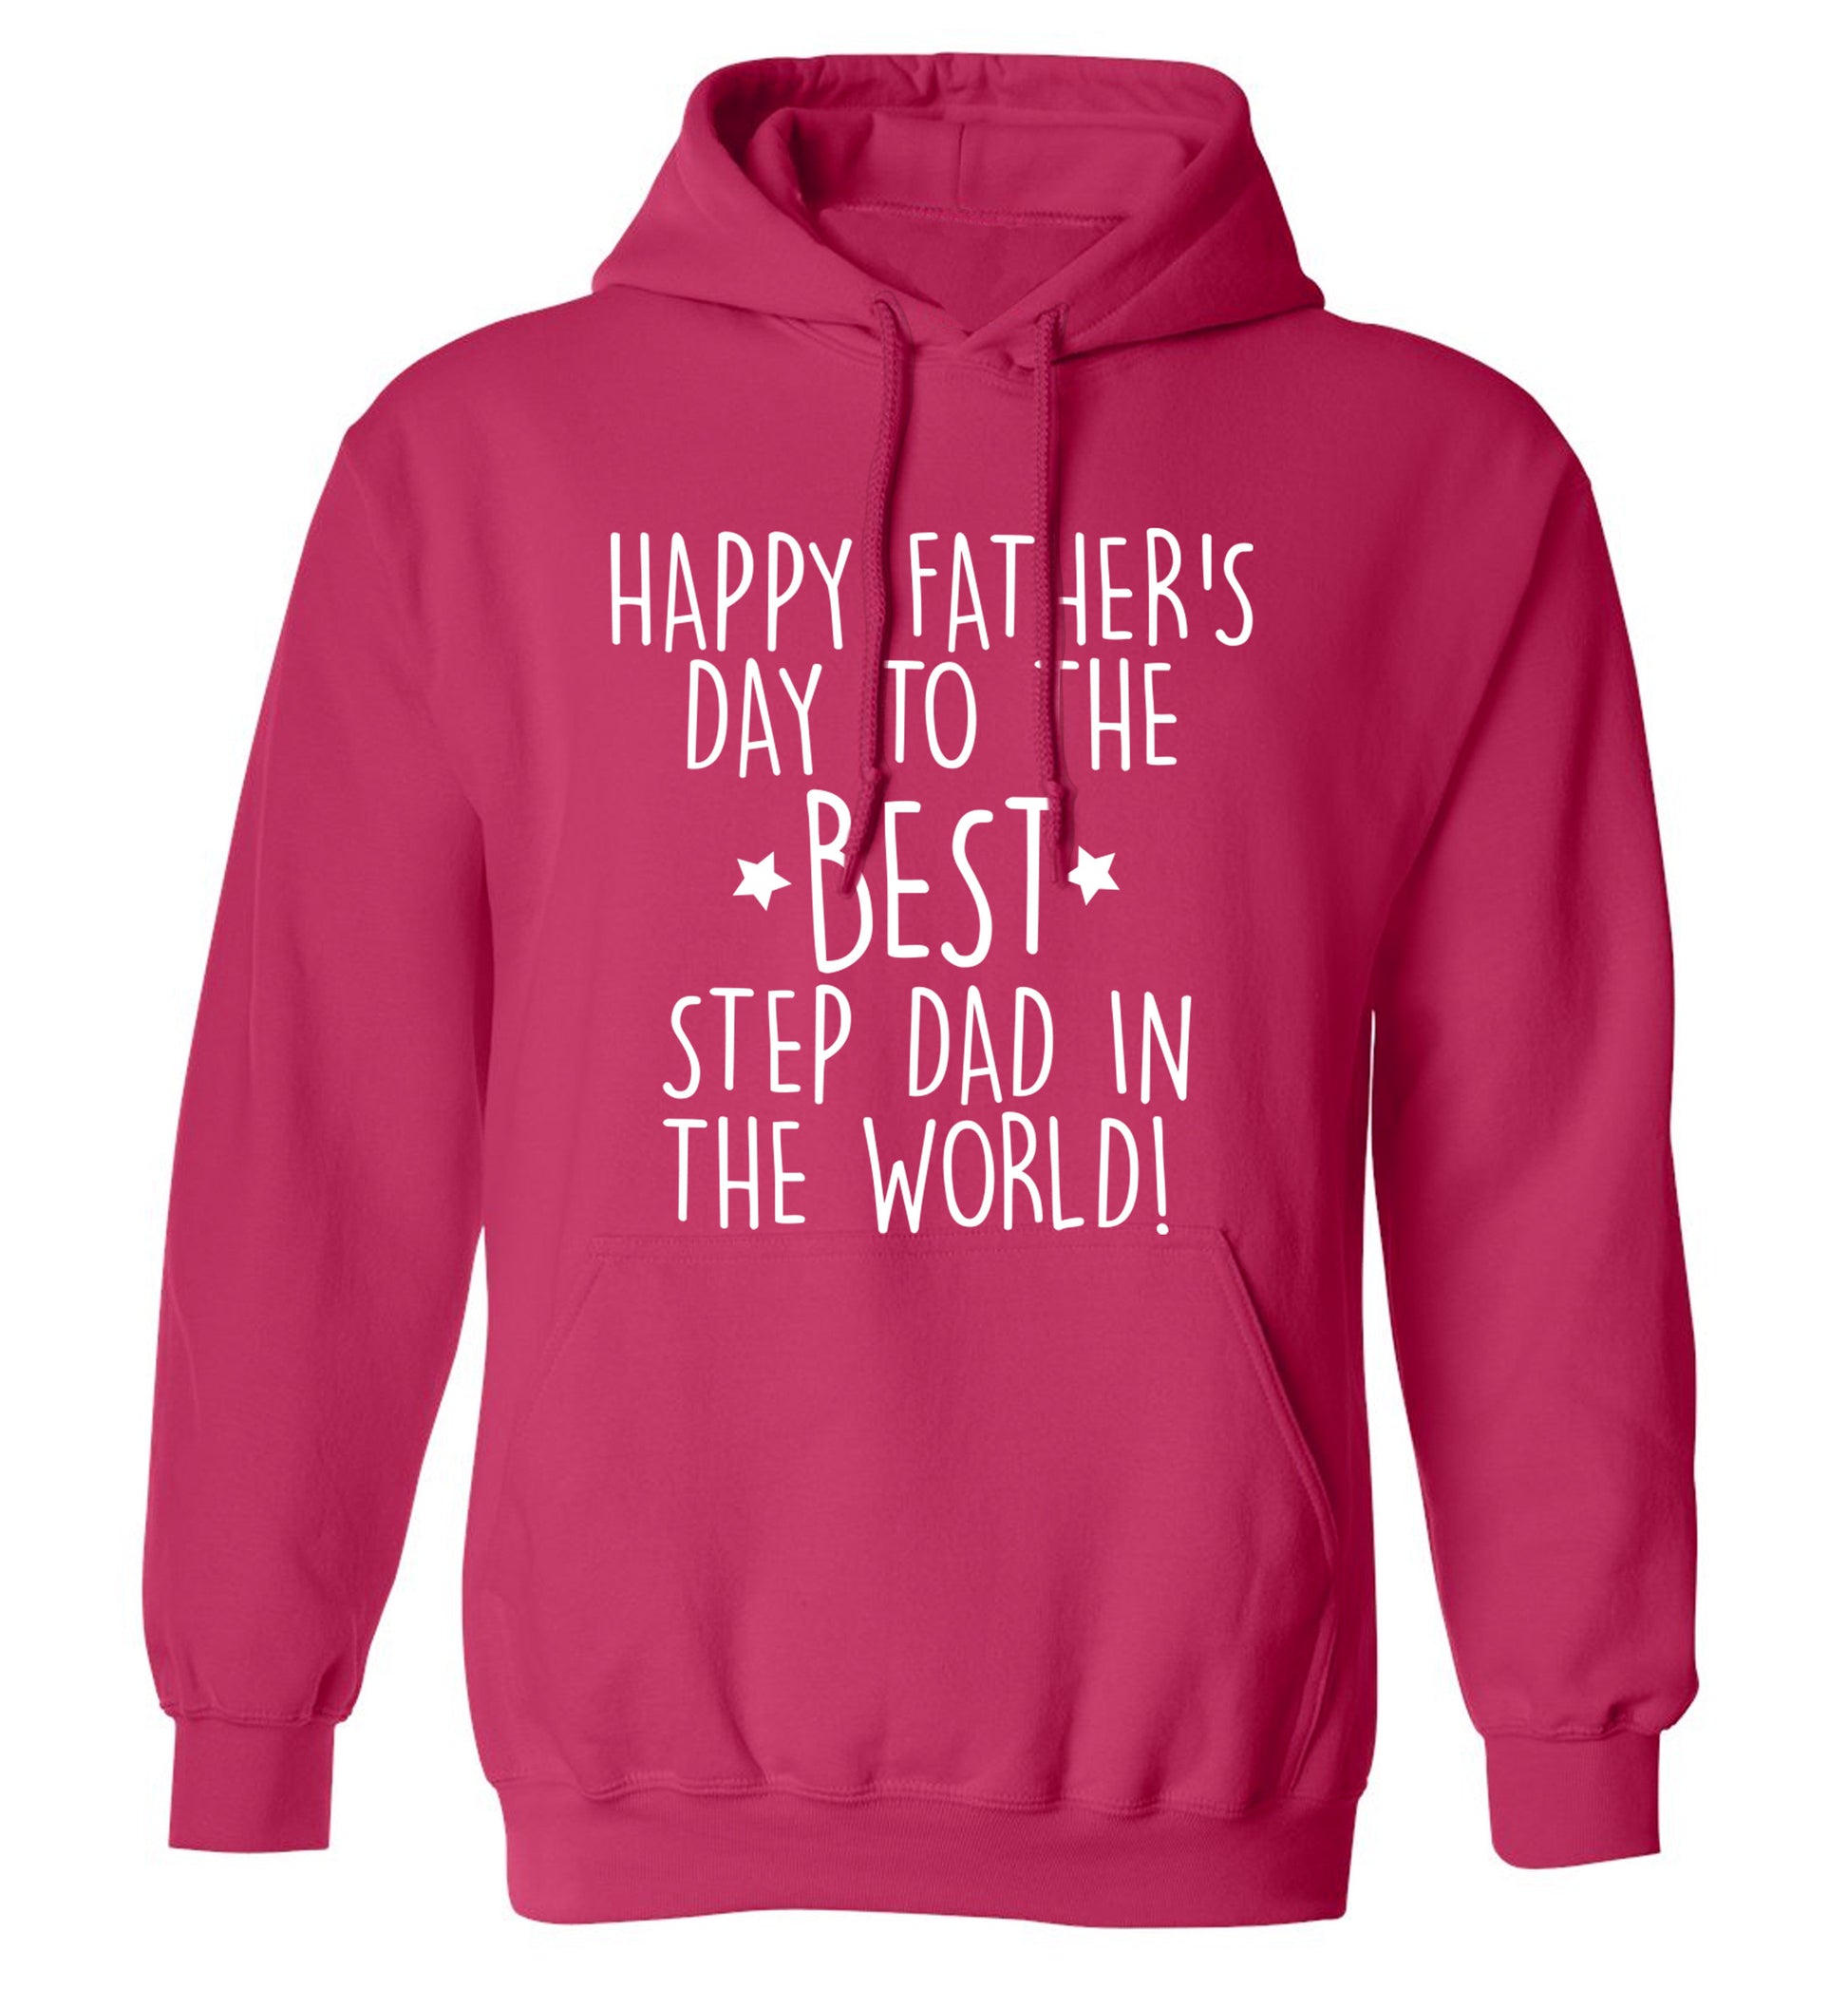 Happy Father's day to the best step dad in the world! adults unisex pink hoodie 2XL